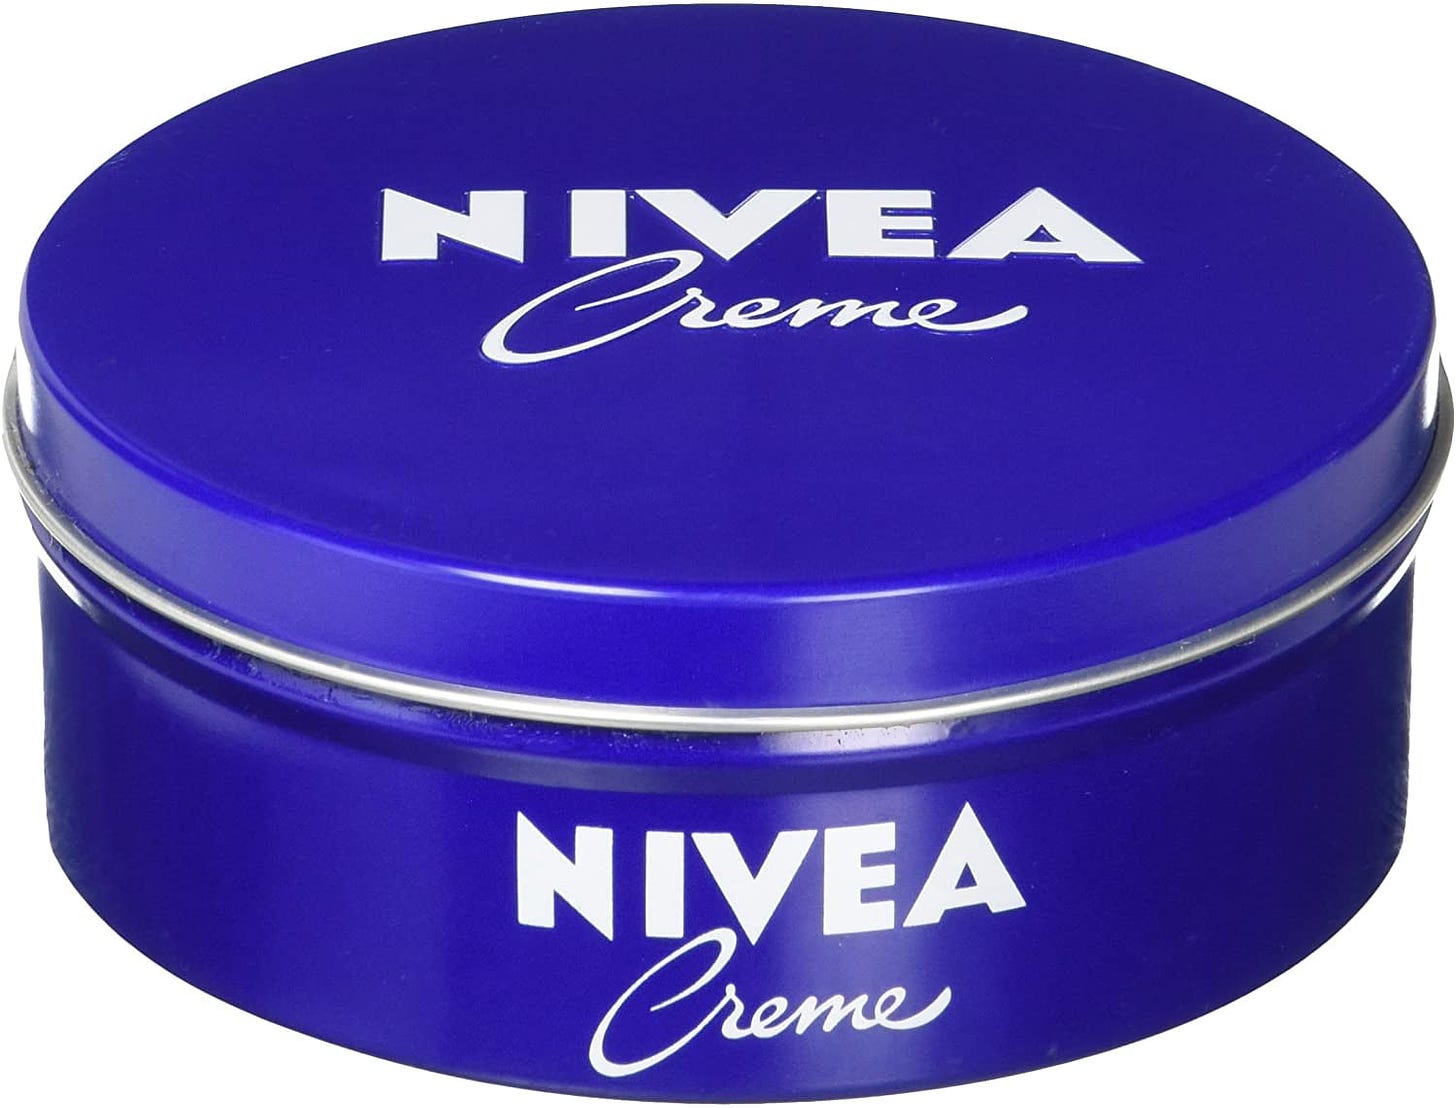 100% Authentic German Nivea Creme Cream 400ML/13.54 fl. oz. - Made &  Imported from Germany! - Walmart.com